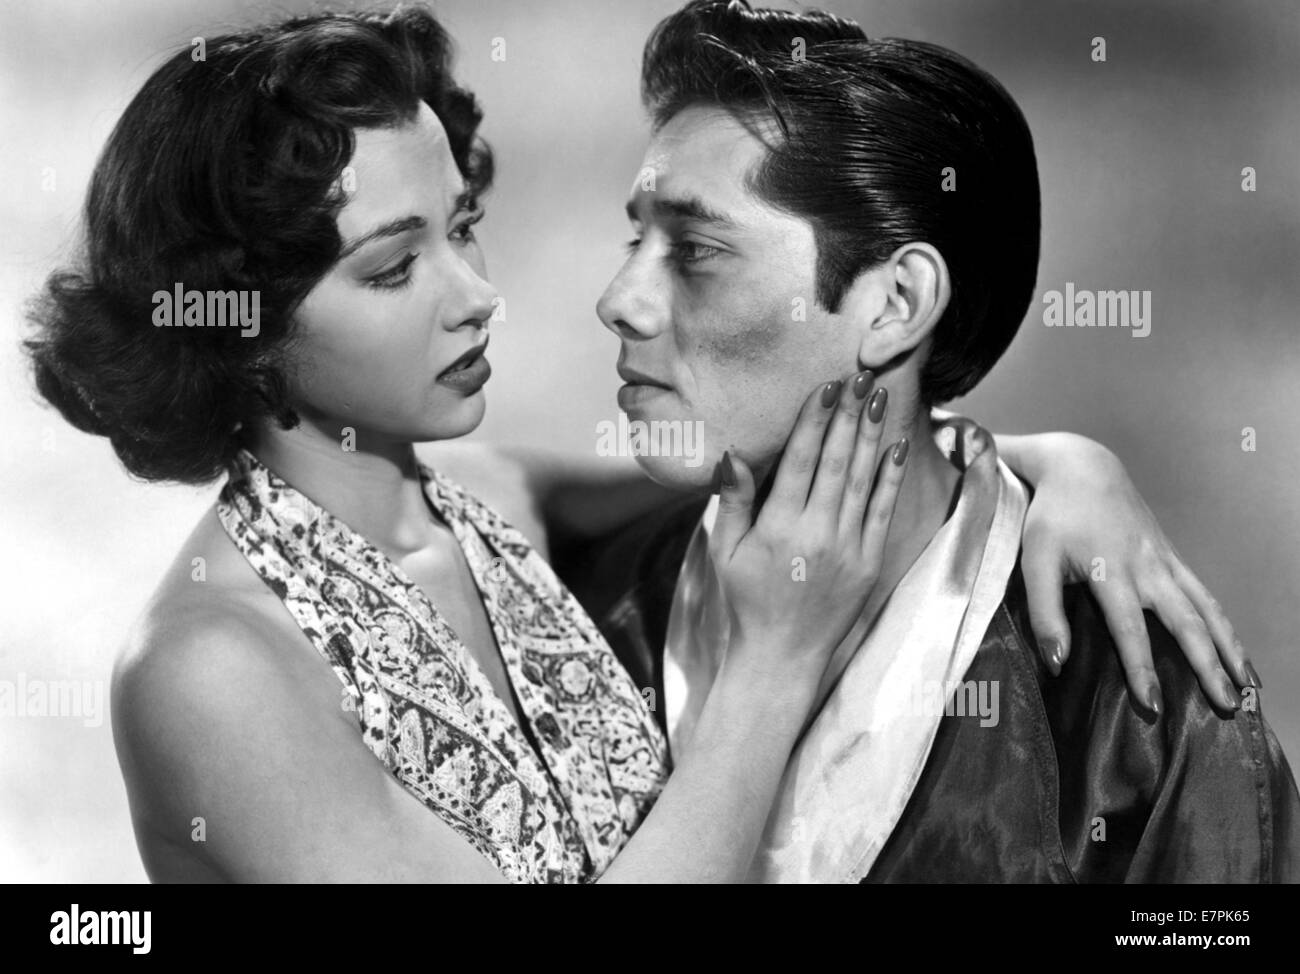 THE RING 1952 King Brothers Productions film with Rita Moreno and Lalo Rios Stock Photo